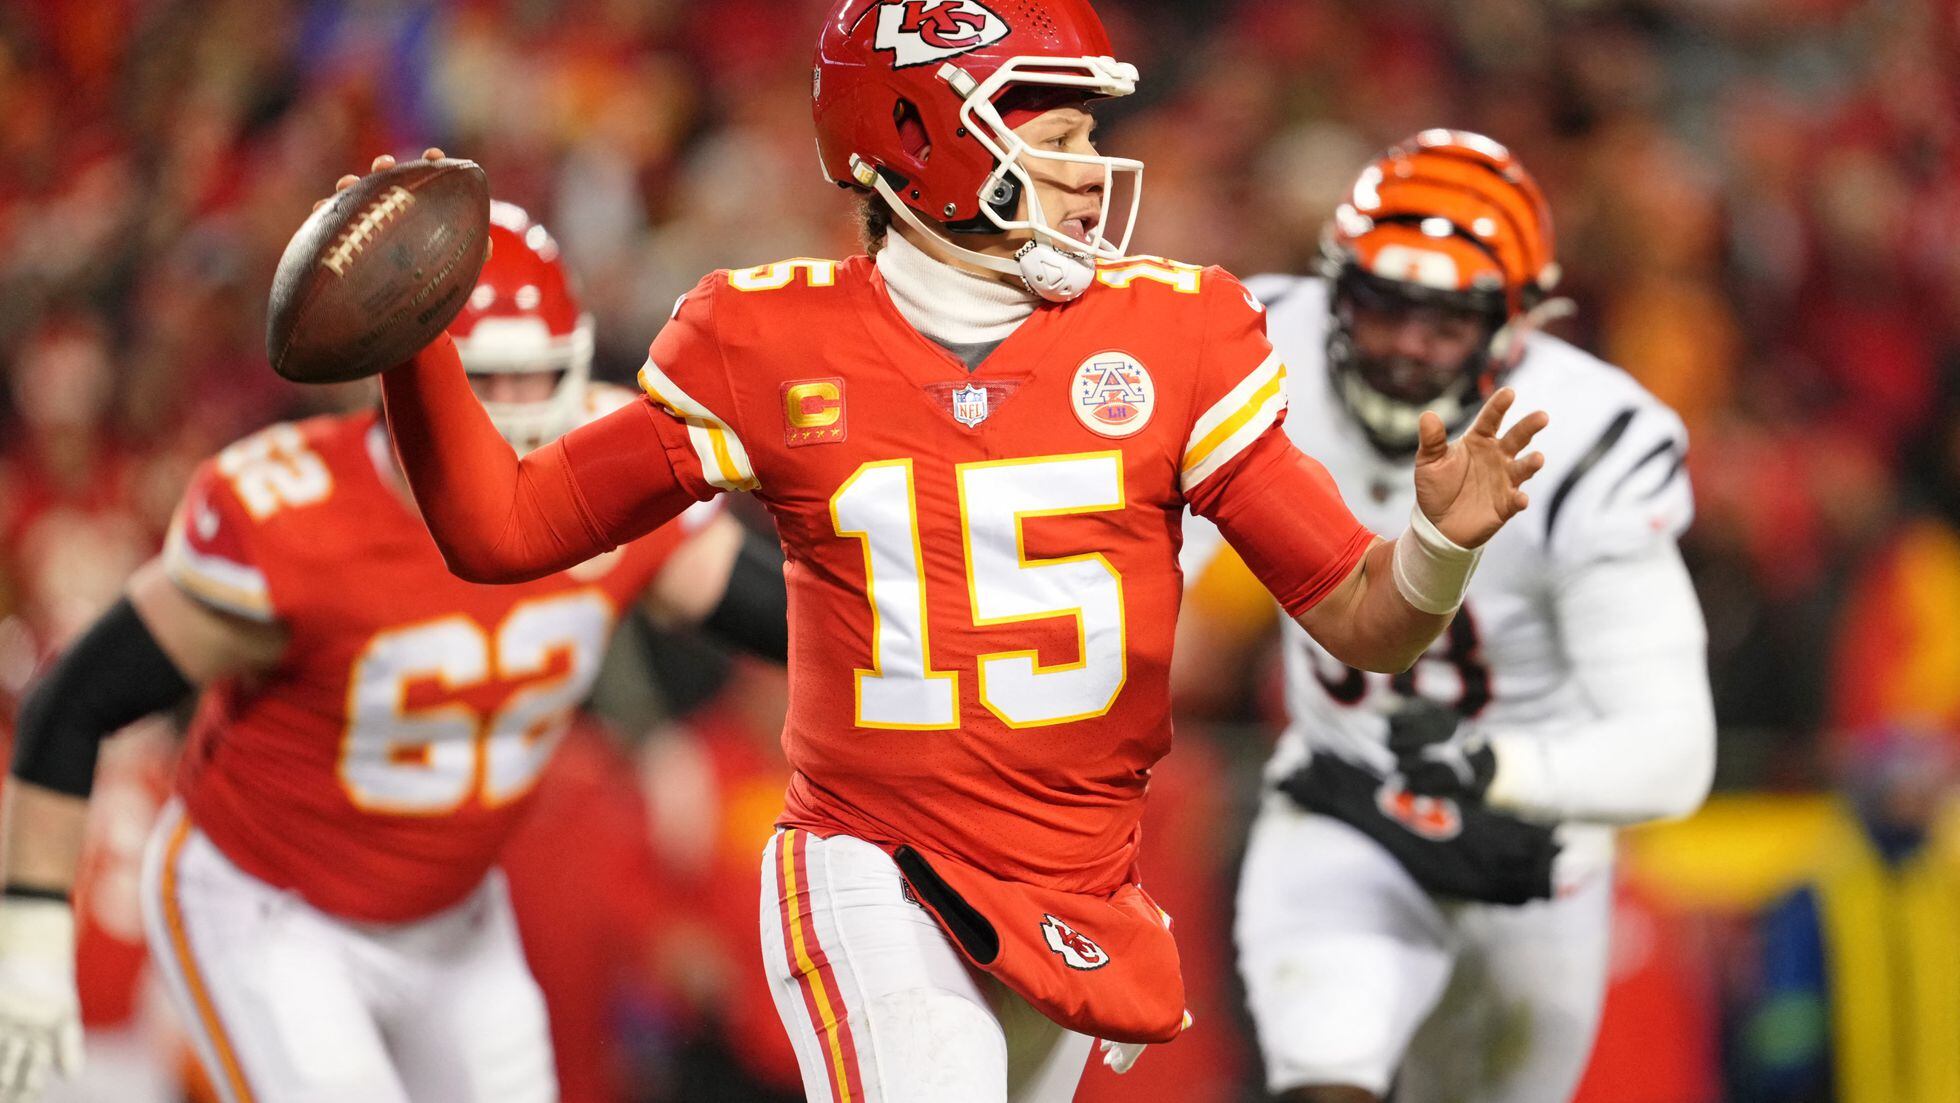 Super Bowl 2020 matchup of Chiefs vs. 49ers has historic feel